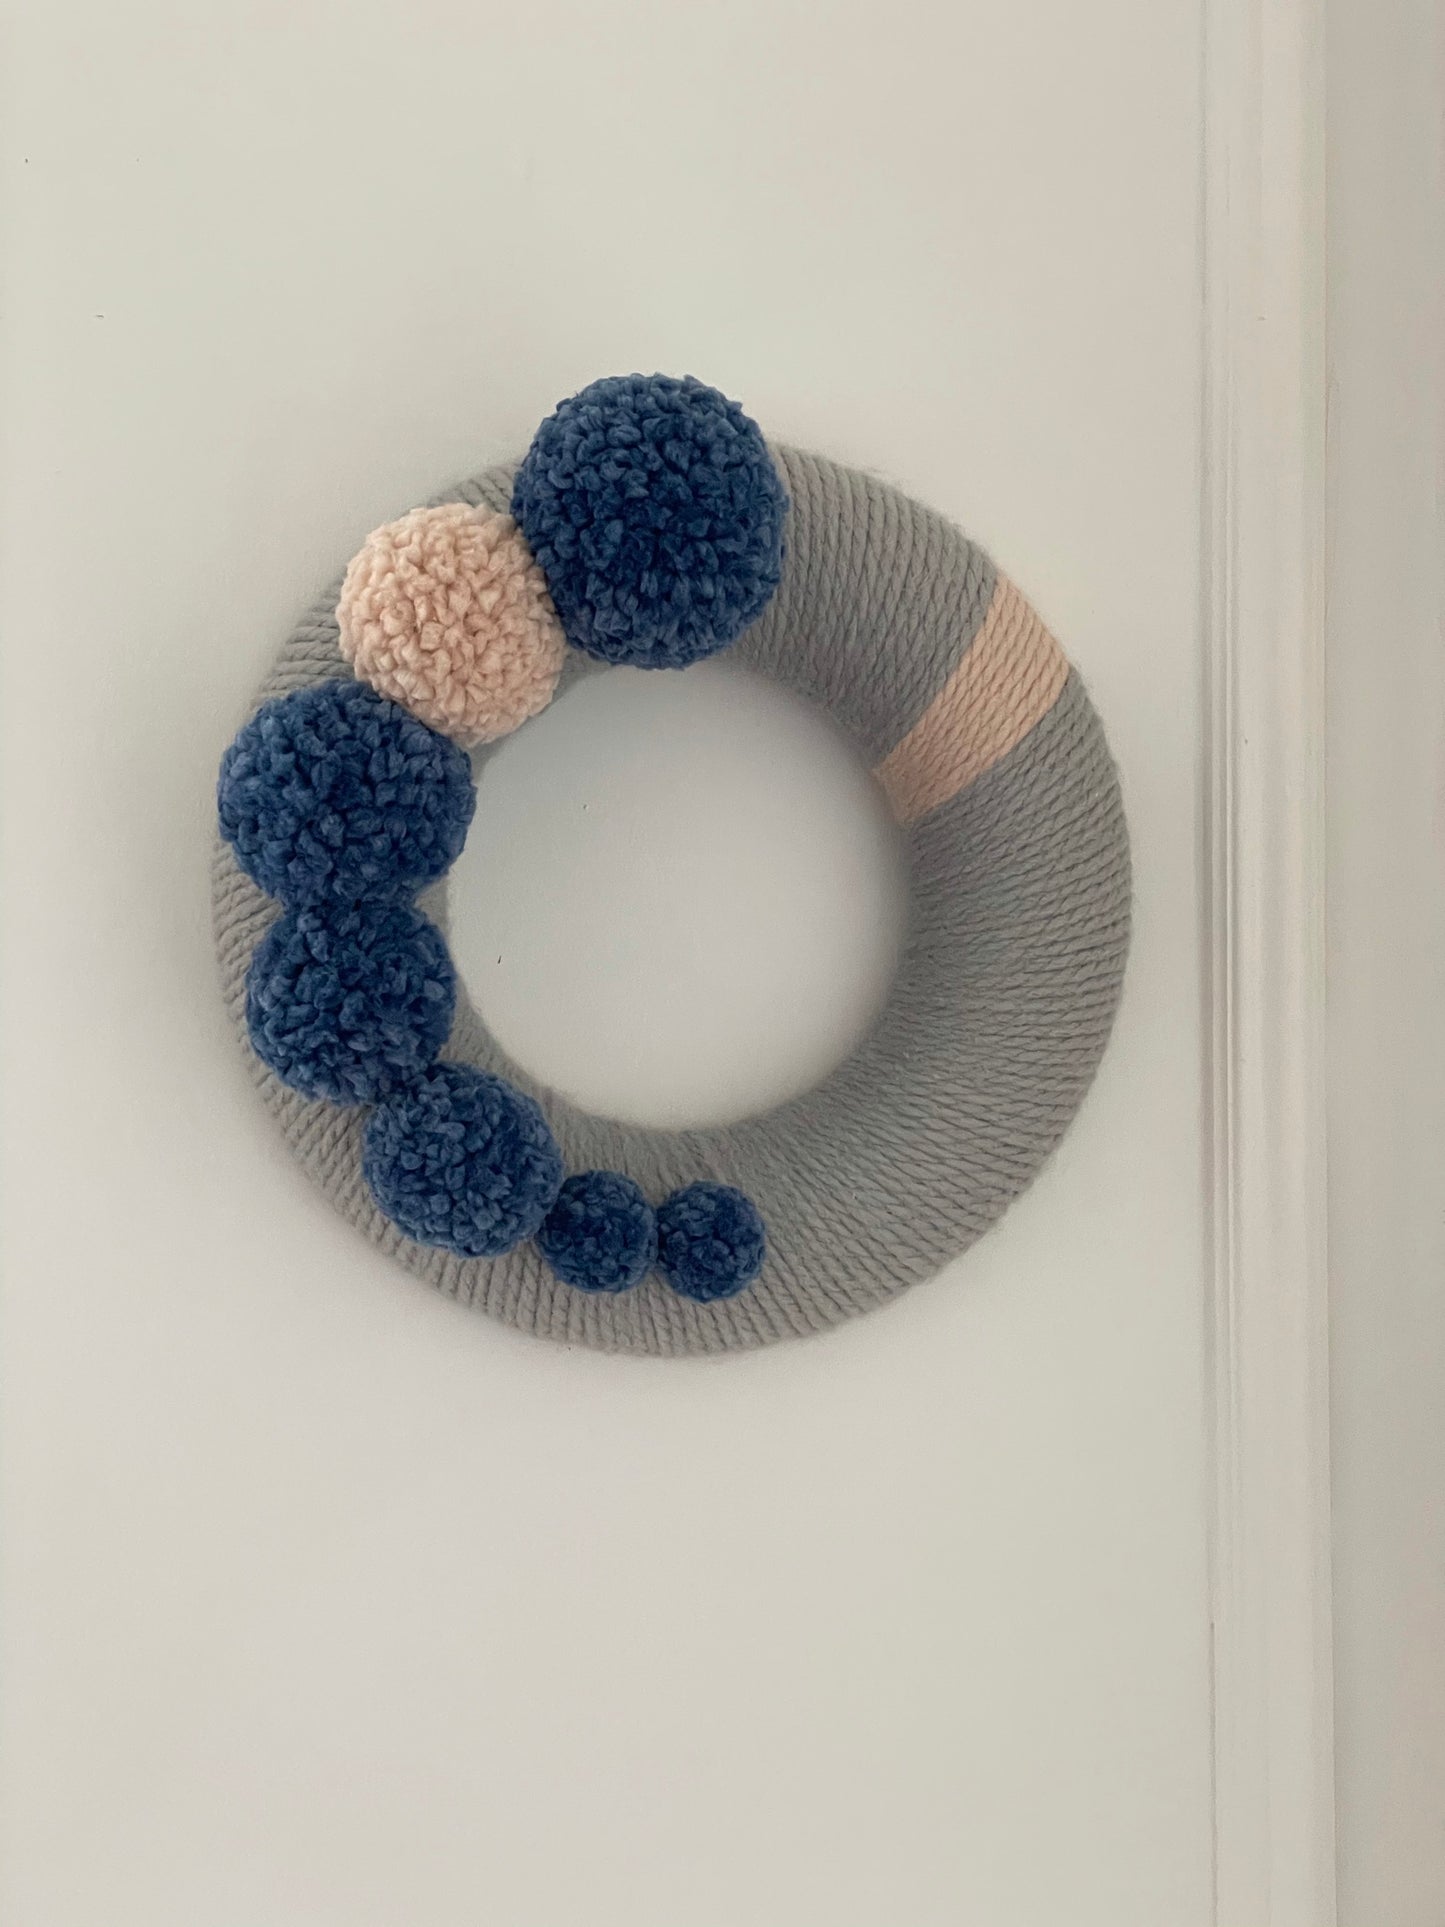 Commissioned Wreaths